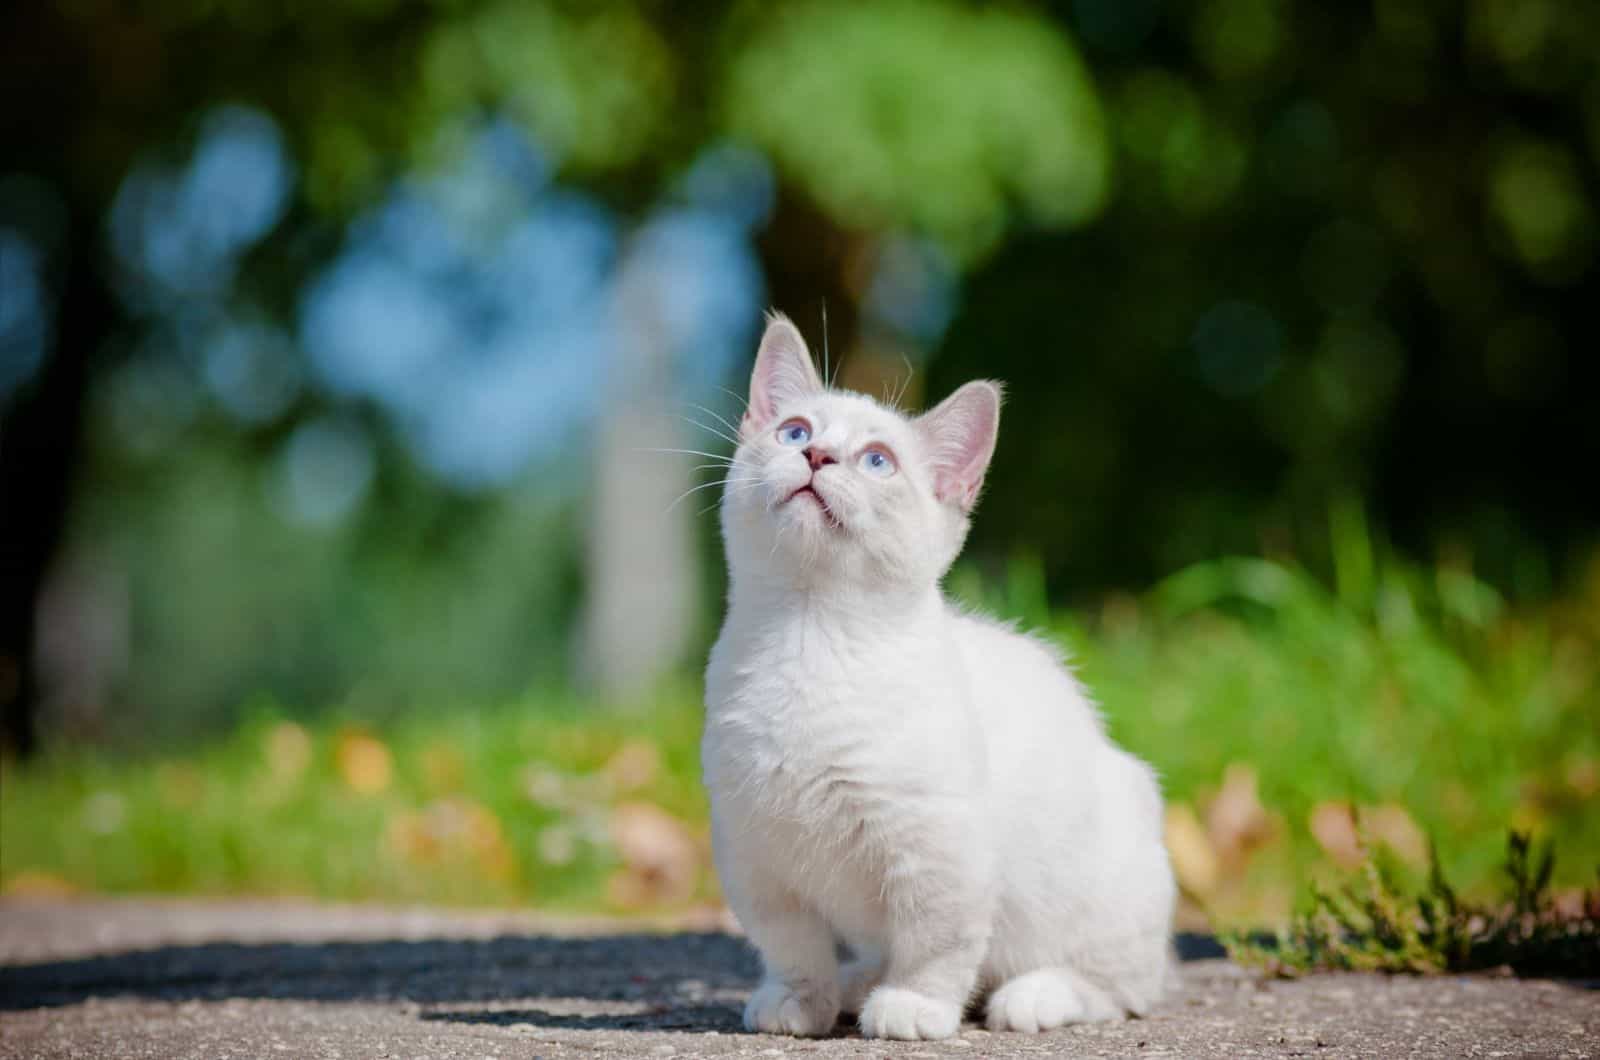 munchkin cat sitting on the road outdoor